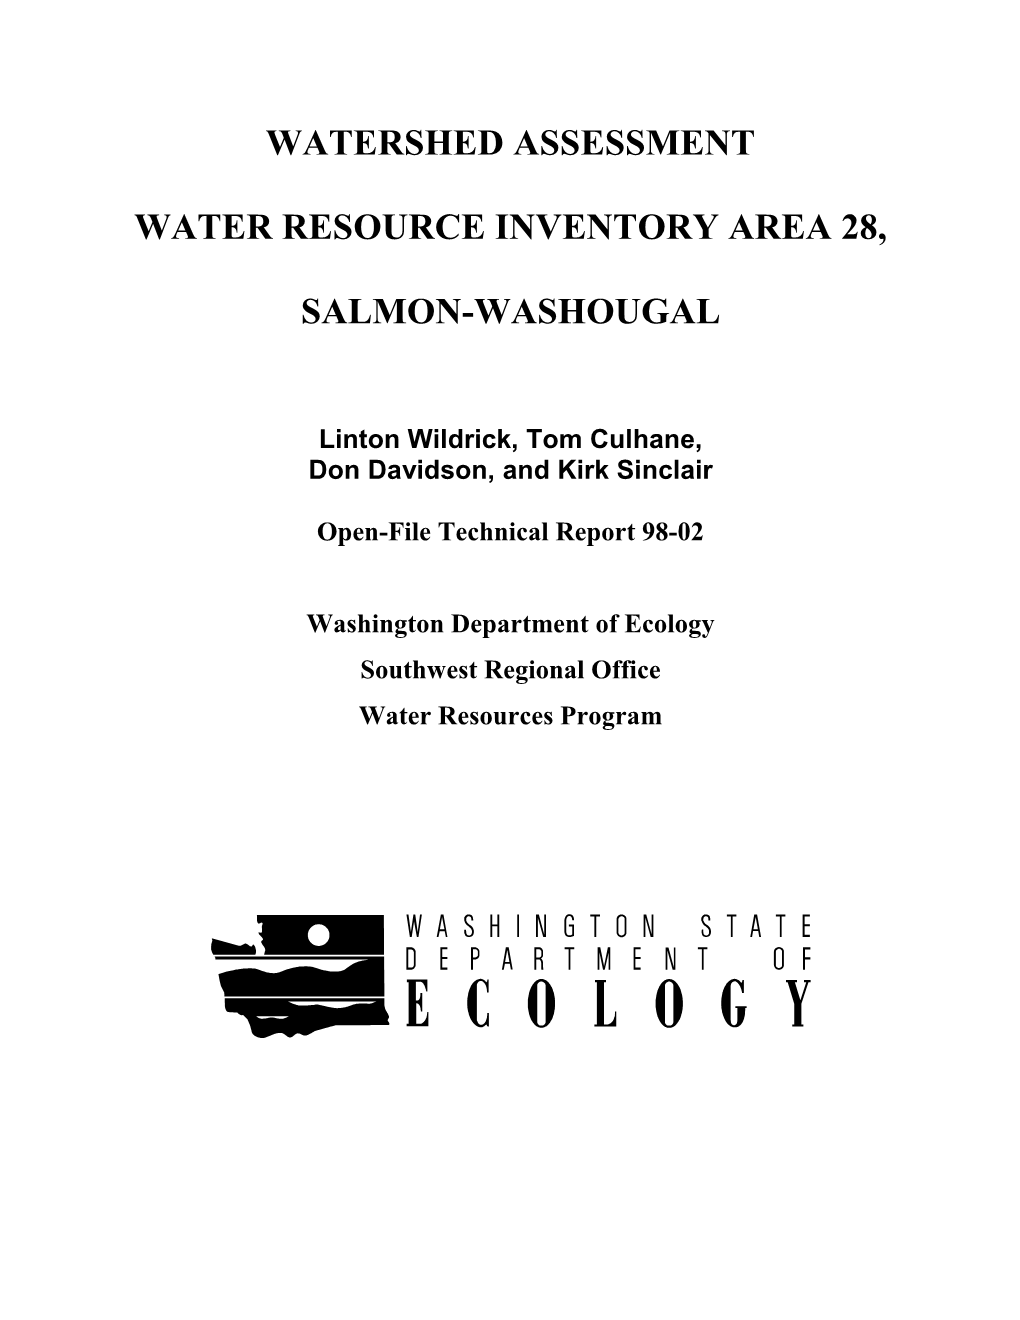 Watershed Assessment Water Resource Inventory Area 28, Salmon-Washougal